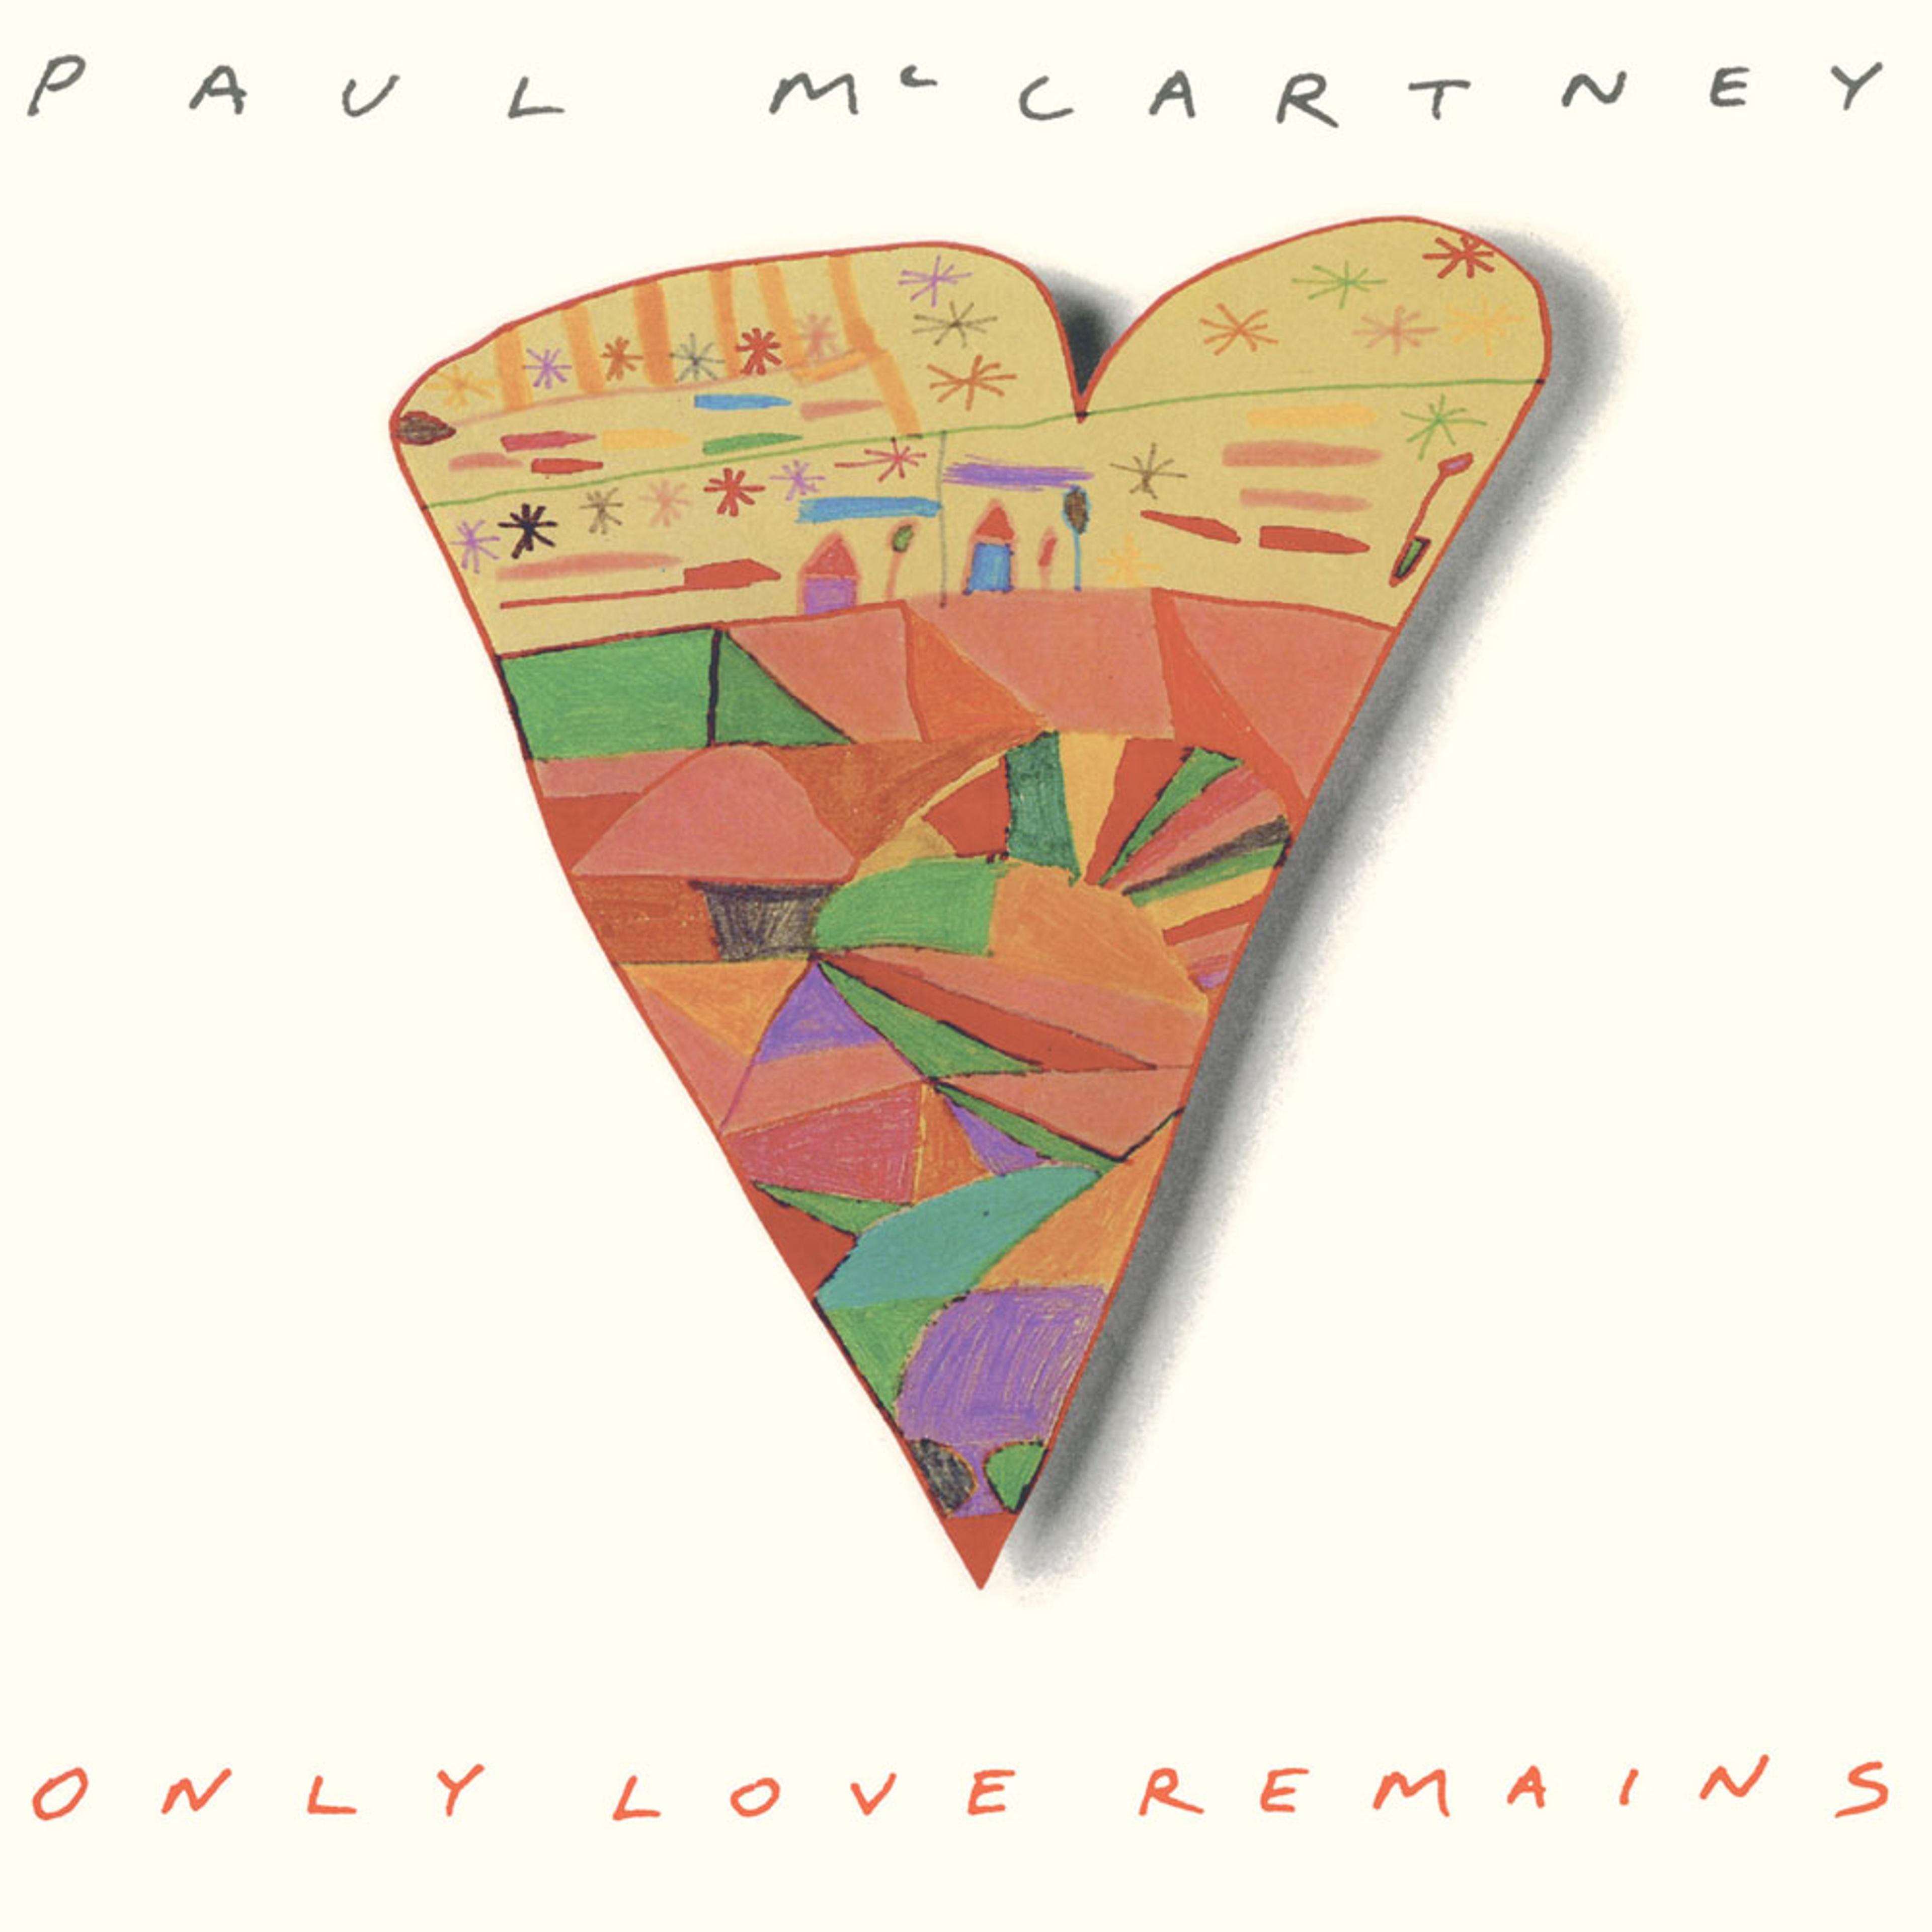 “Only Love Remains” Single artwork as featured in 'The 7" Singles Box'